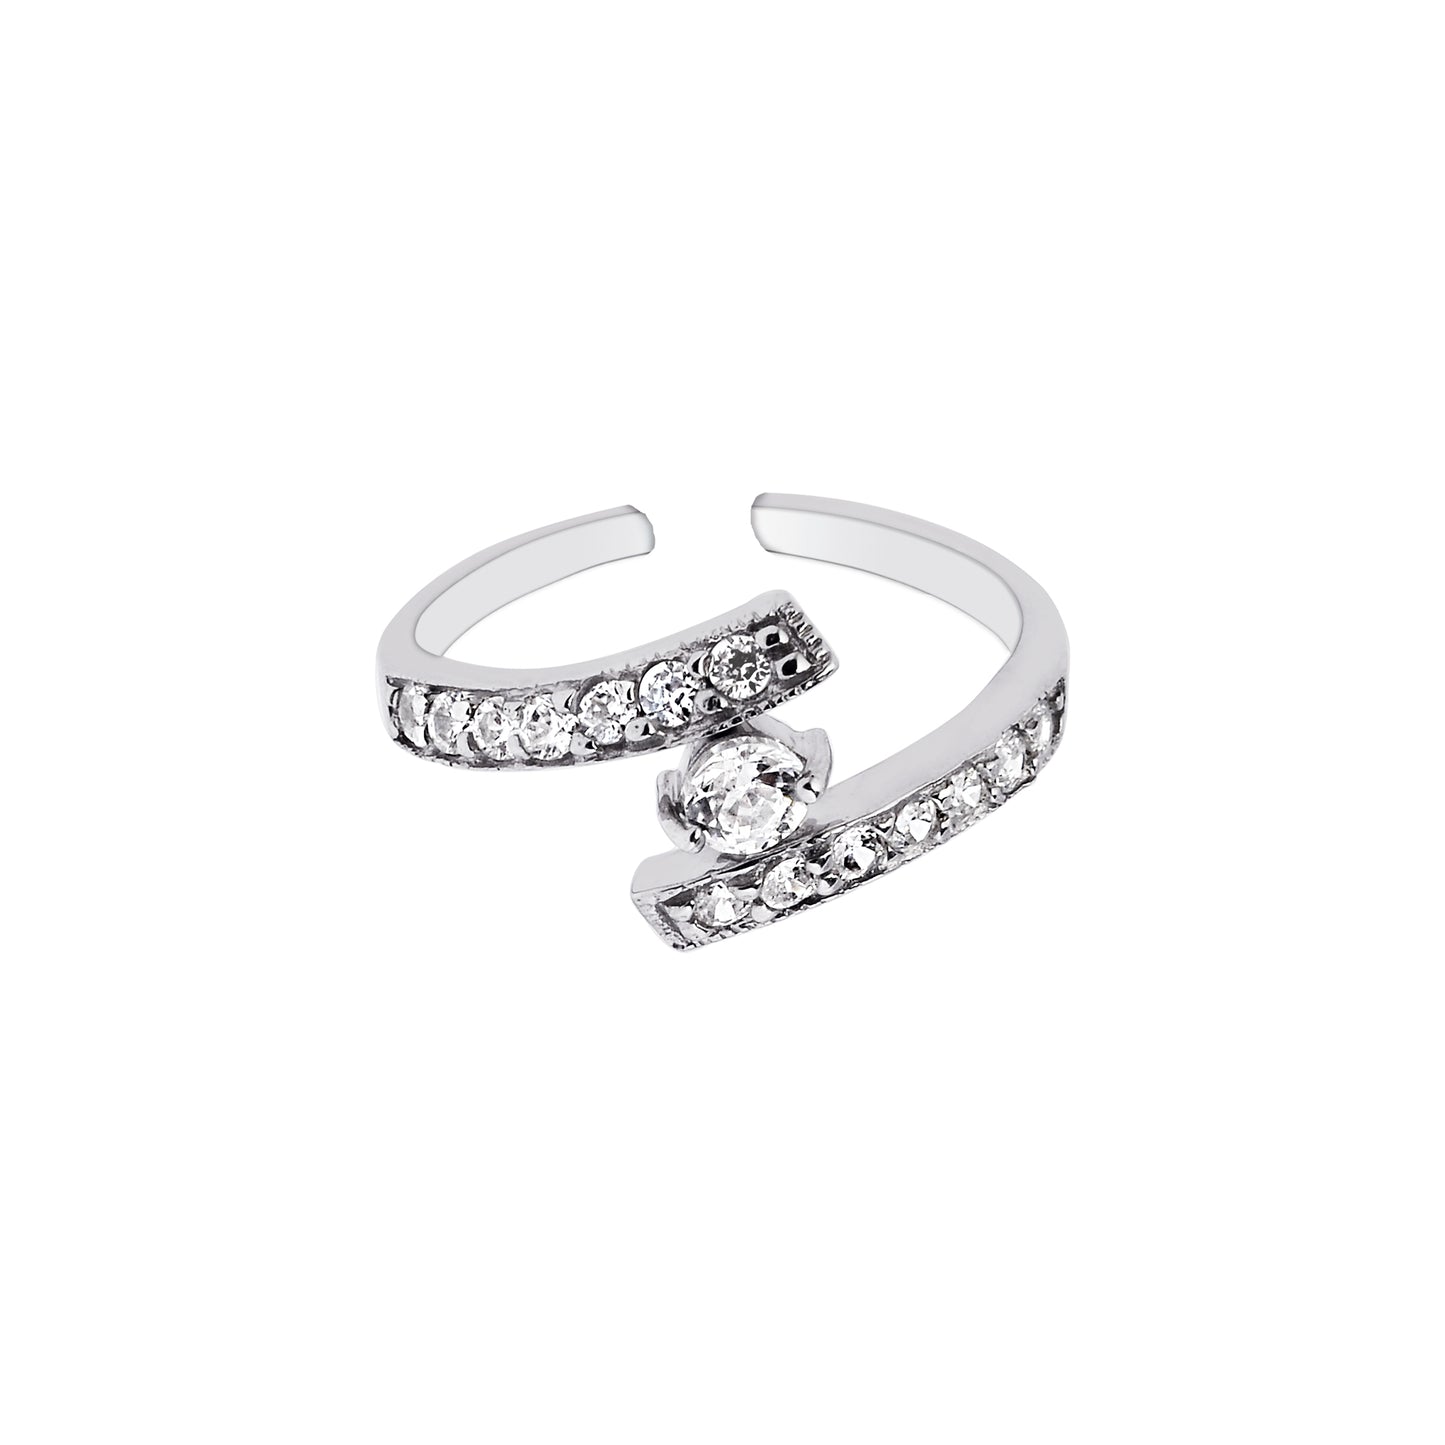 Silver CZ Bypass Toe Ring with Round Solitaire CZ